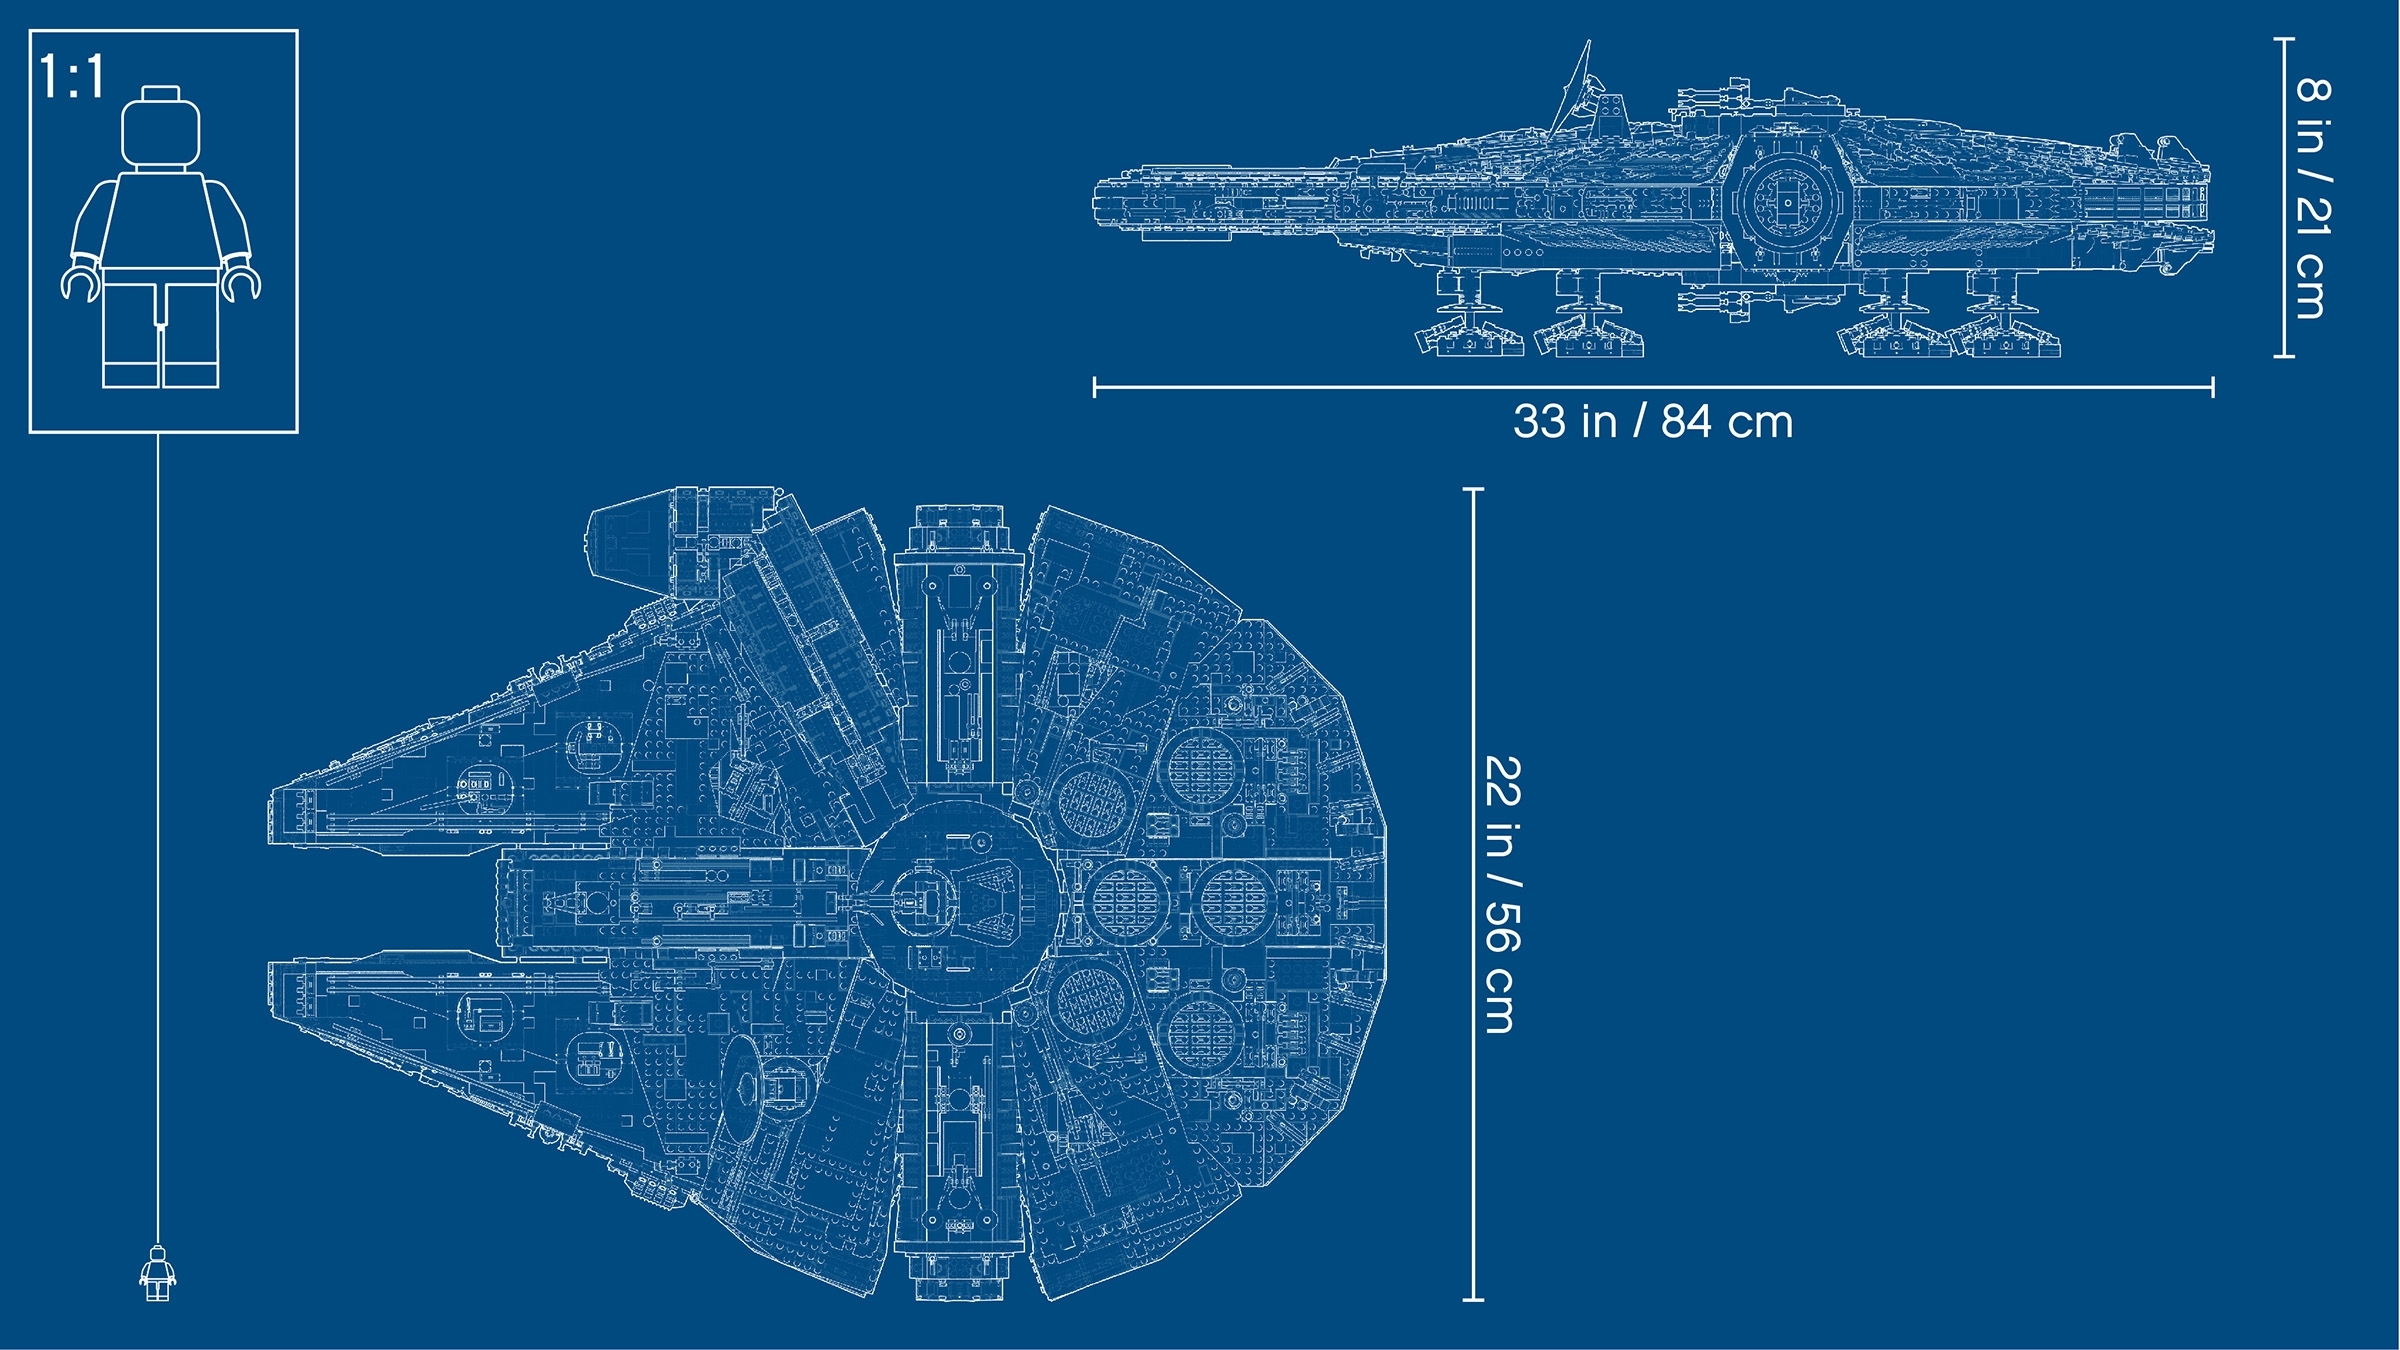 Millennium Falcon™ 75192 | Star Wars™ | Buy online at the Official LEGO®  Shop GB